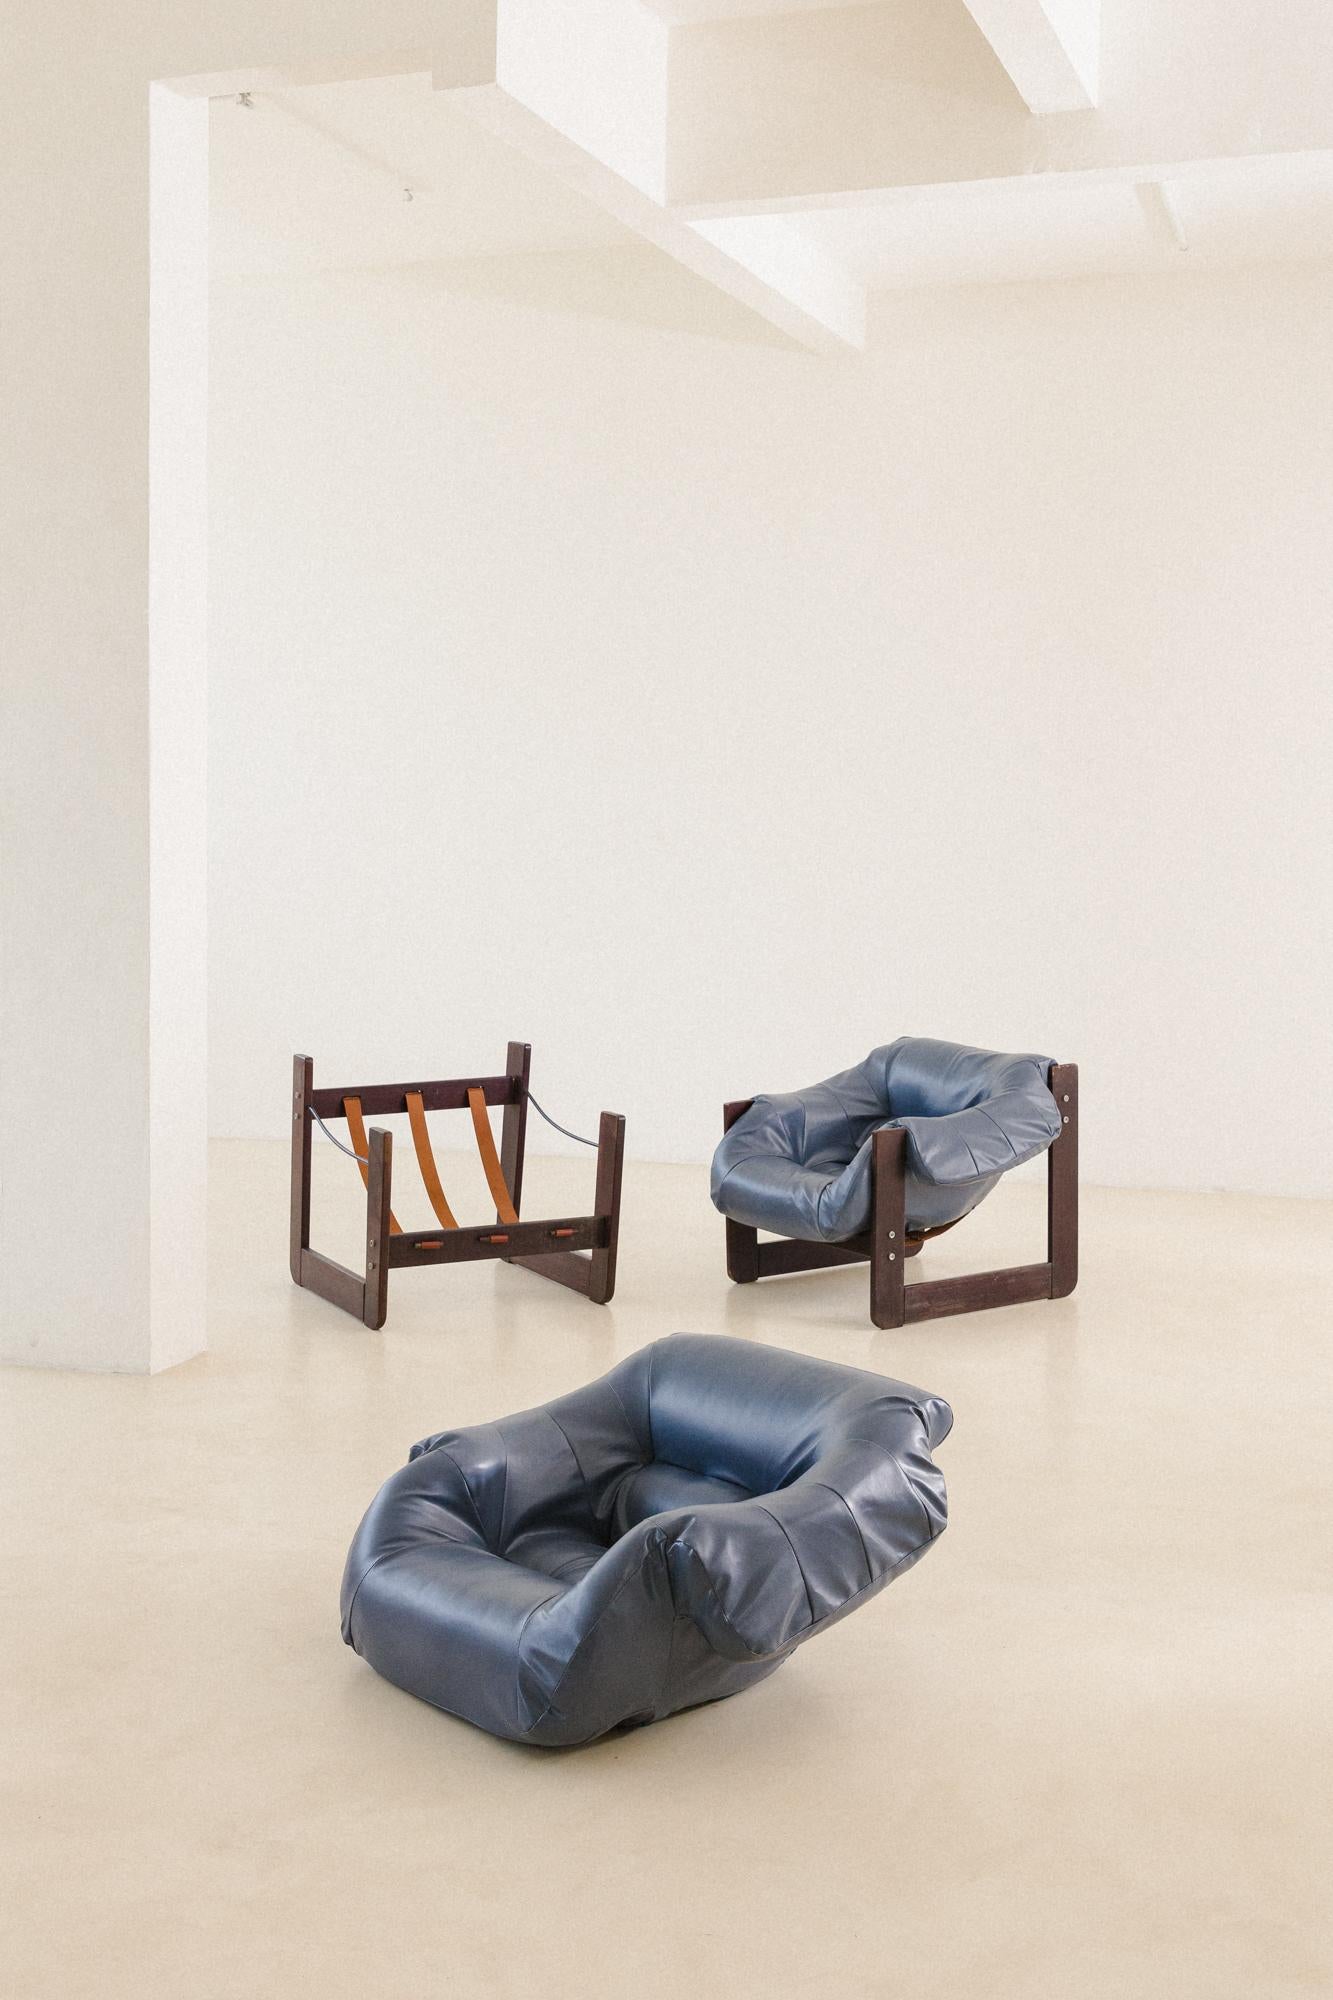 In his designs, Percival Lafer sought ergonomy and comfort. This pair of MP-97 lounge chairs by Percival Lafer comprises a solid wood structure with a single piece of a loose foam seat. Its unique design and construction make this an authentic